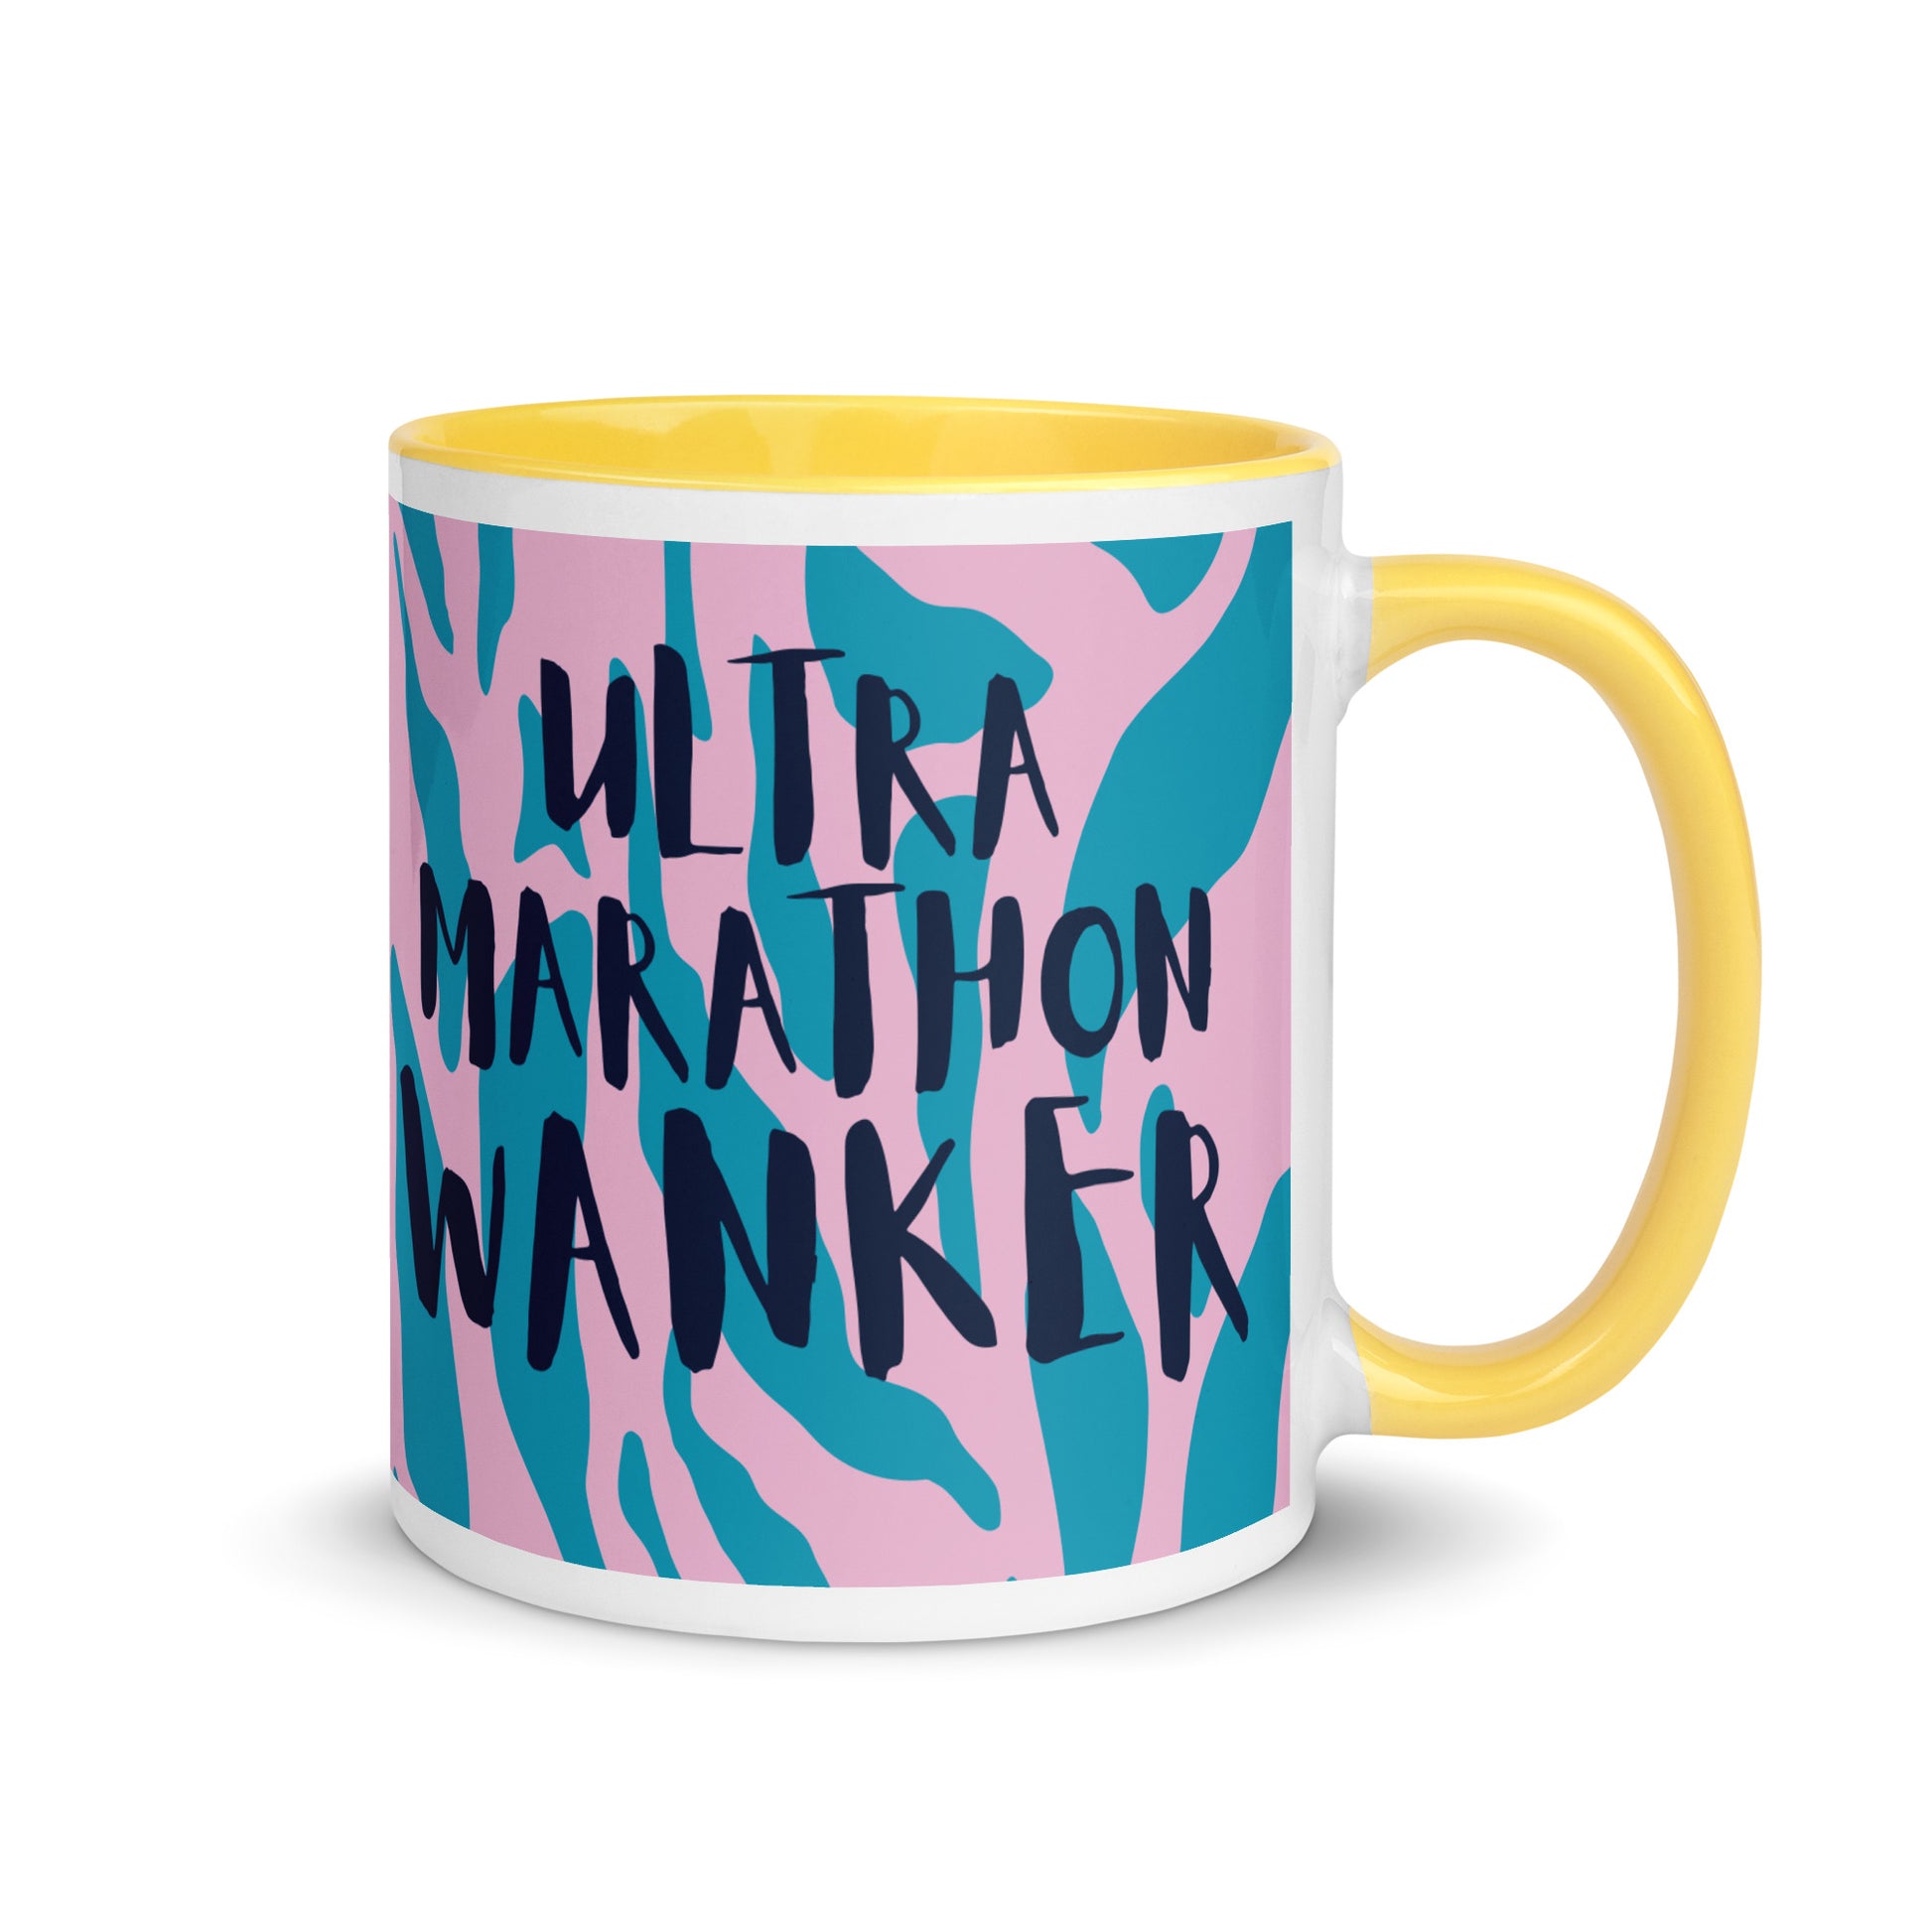 coffee mug with a yellow handle and rim, with the words ultra marathon wanker written across a pink and blue animal print background. this is a running gift for ultra marathoners.